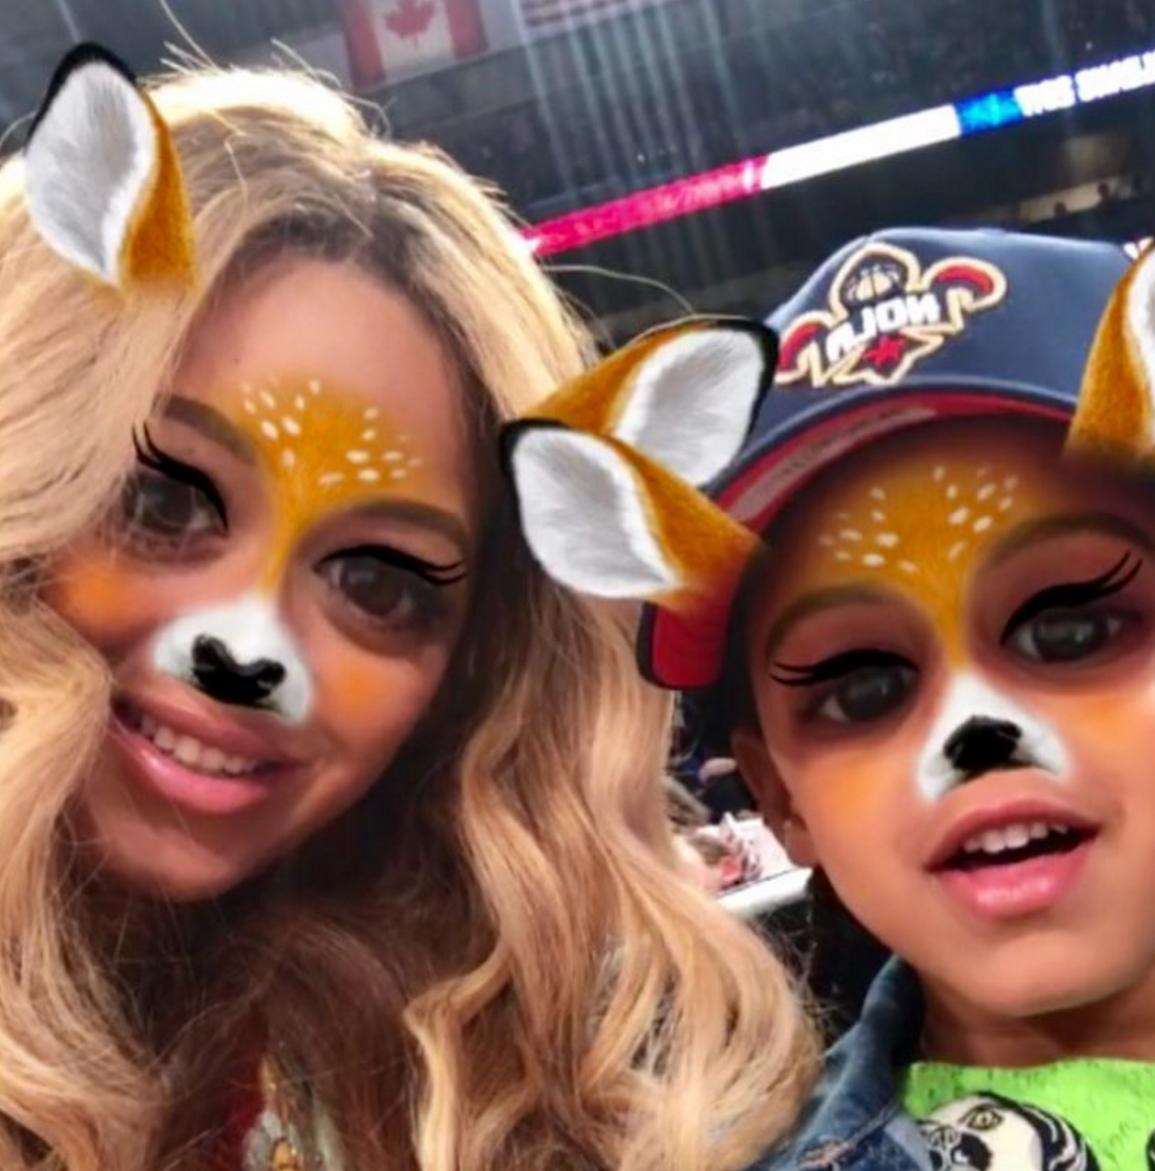 Beyonce Snapchats a photo with Blue-Ivy and people